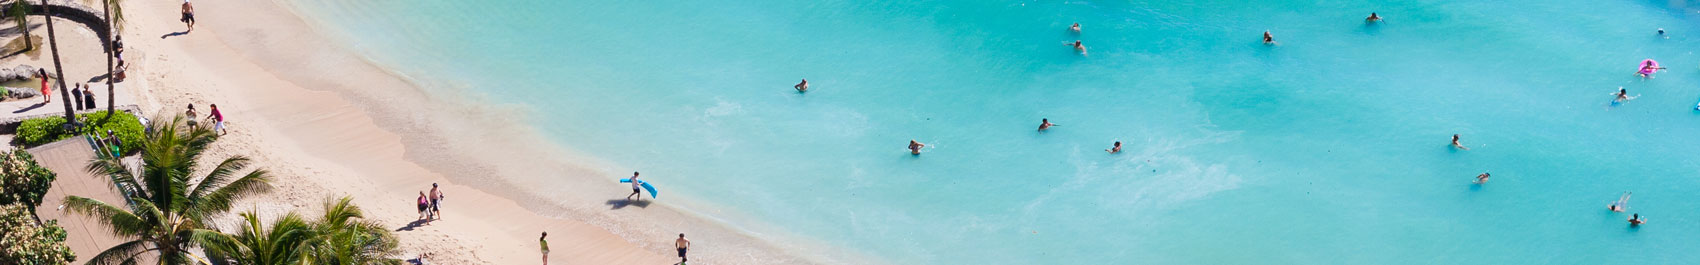 Aerial view of sandy beach with people swimming